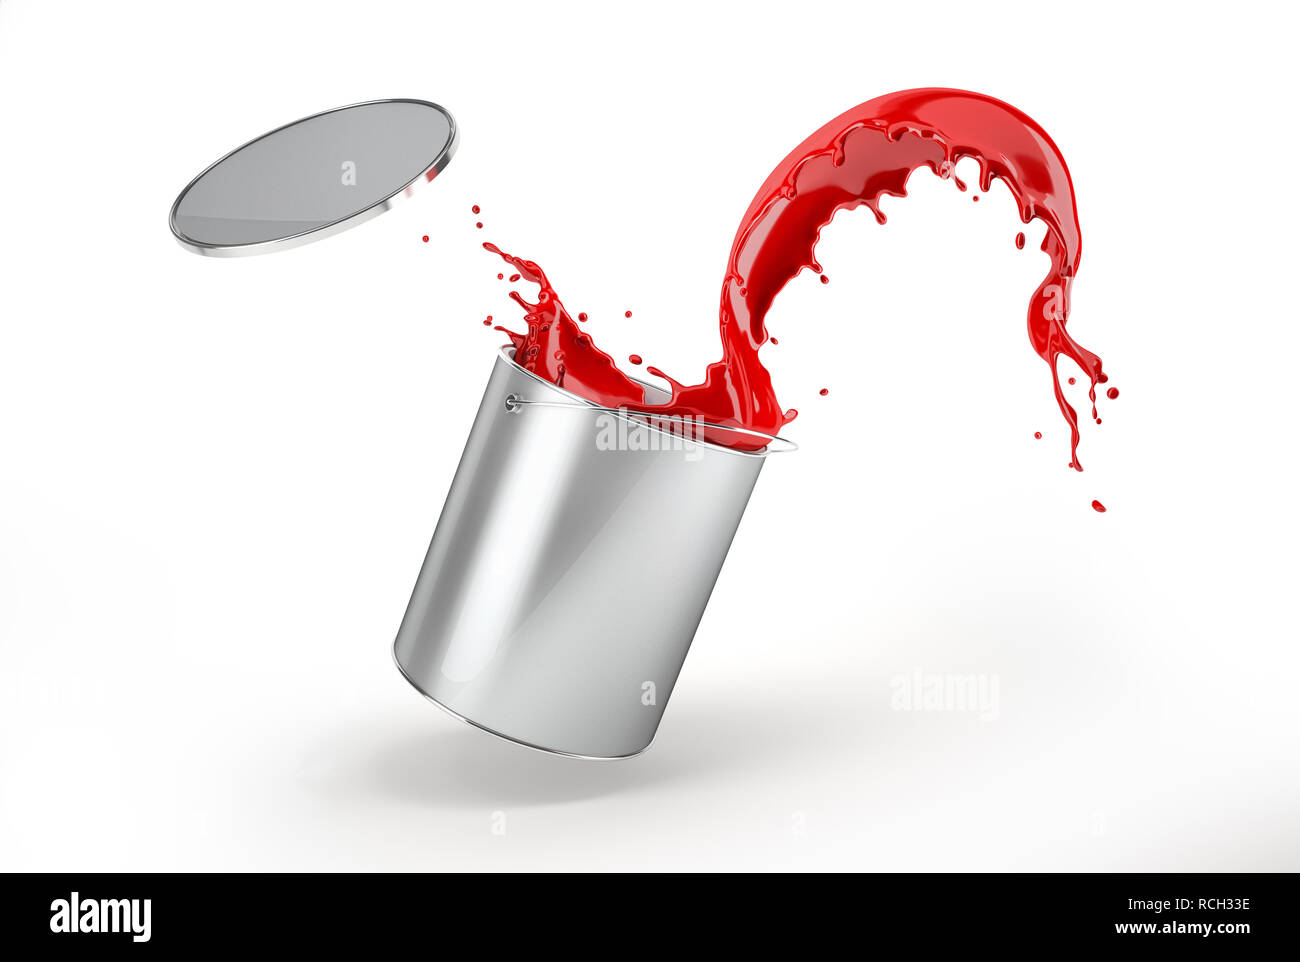 Metallic silver bucket full of vibrant red paint, jumping with vibrant red paint splashing out of it with flying lid. Isolated on white background wit Stock Photo